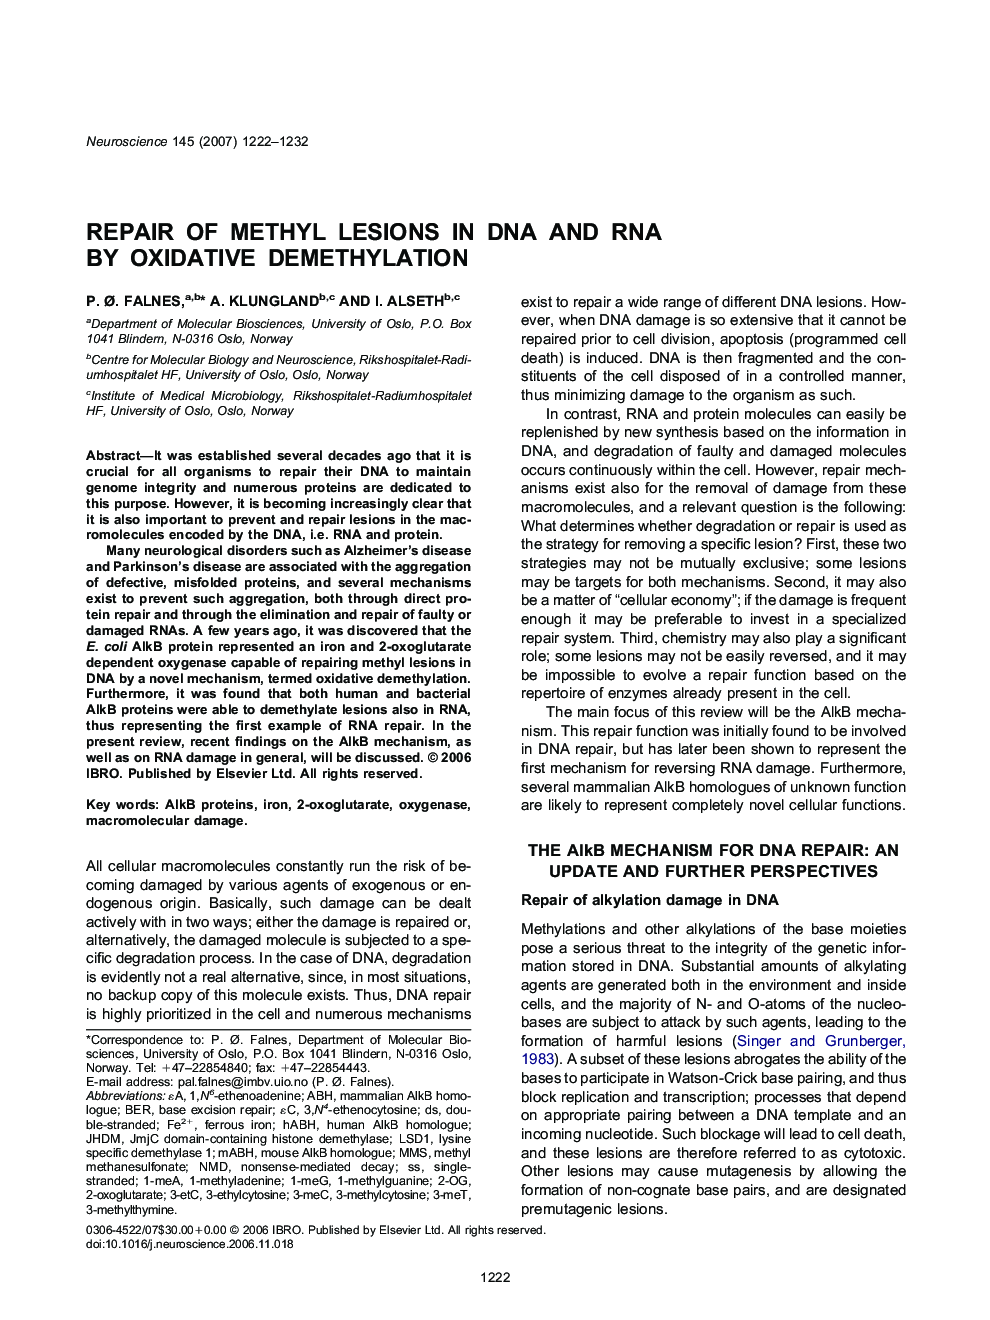 Repair of methyl lesions in DNA and RNA by oxidative demethylation